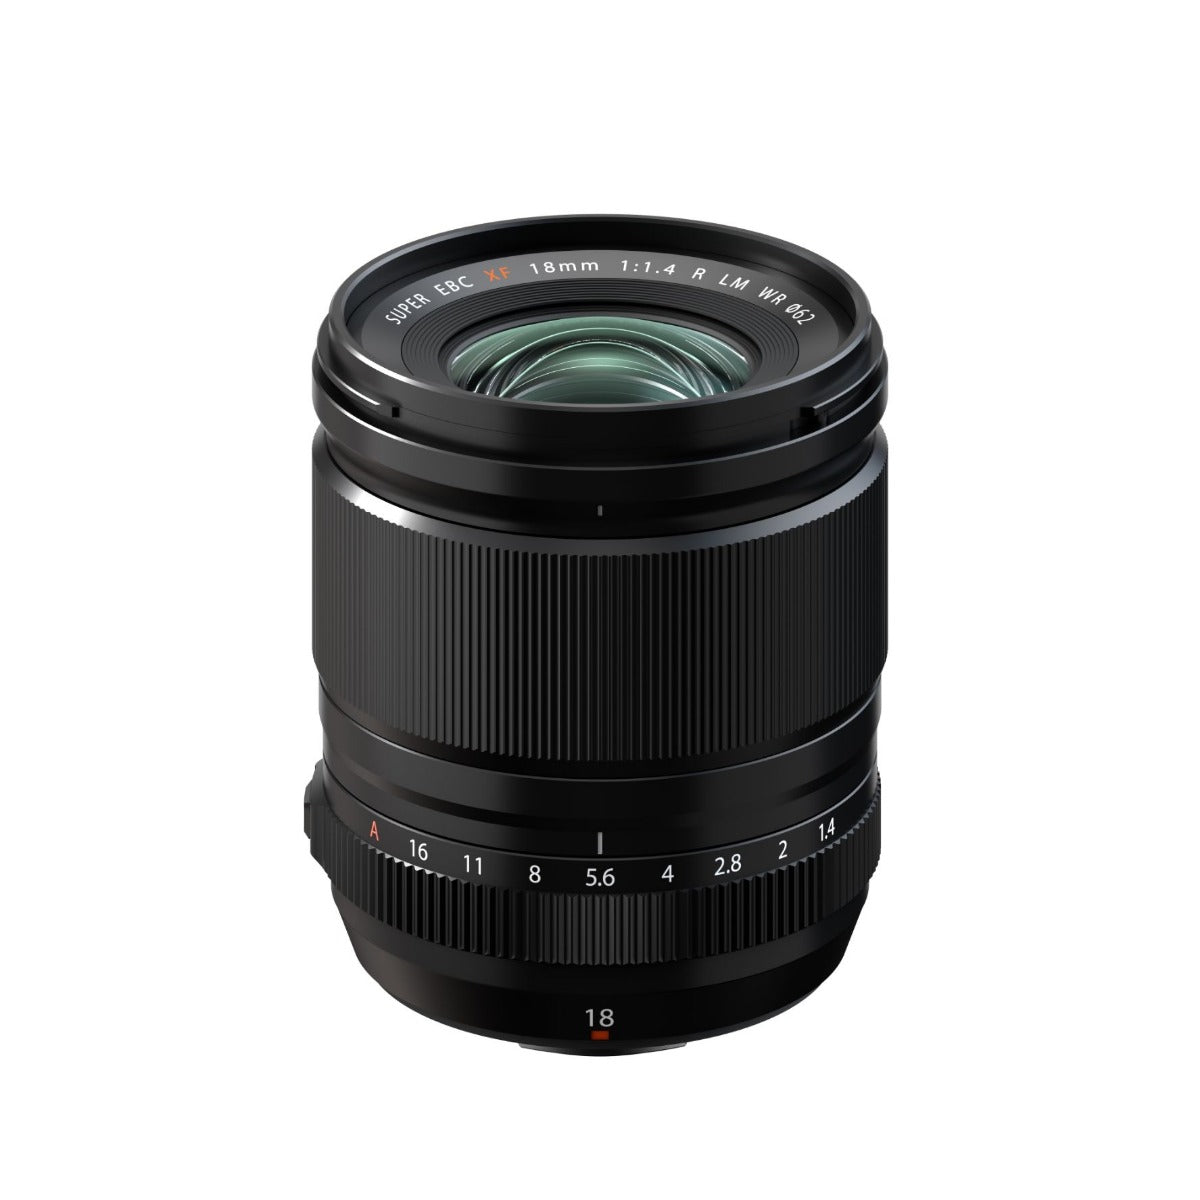 Product Image of Fujifilm XF 18mm F1.4 LM WR lens - CLEARANCE1841